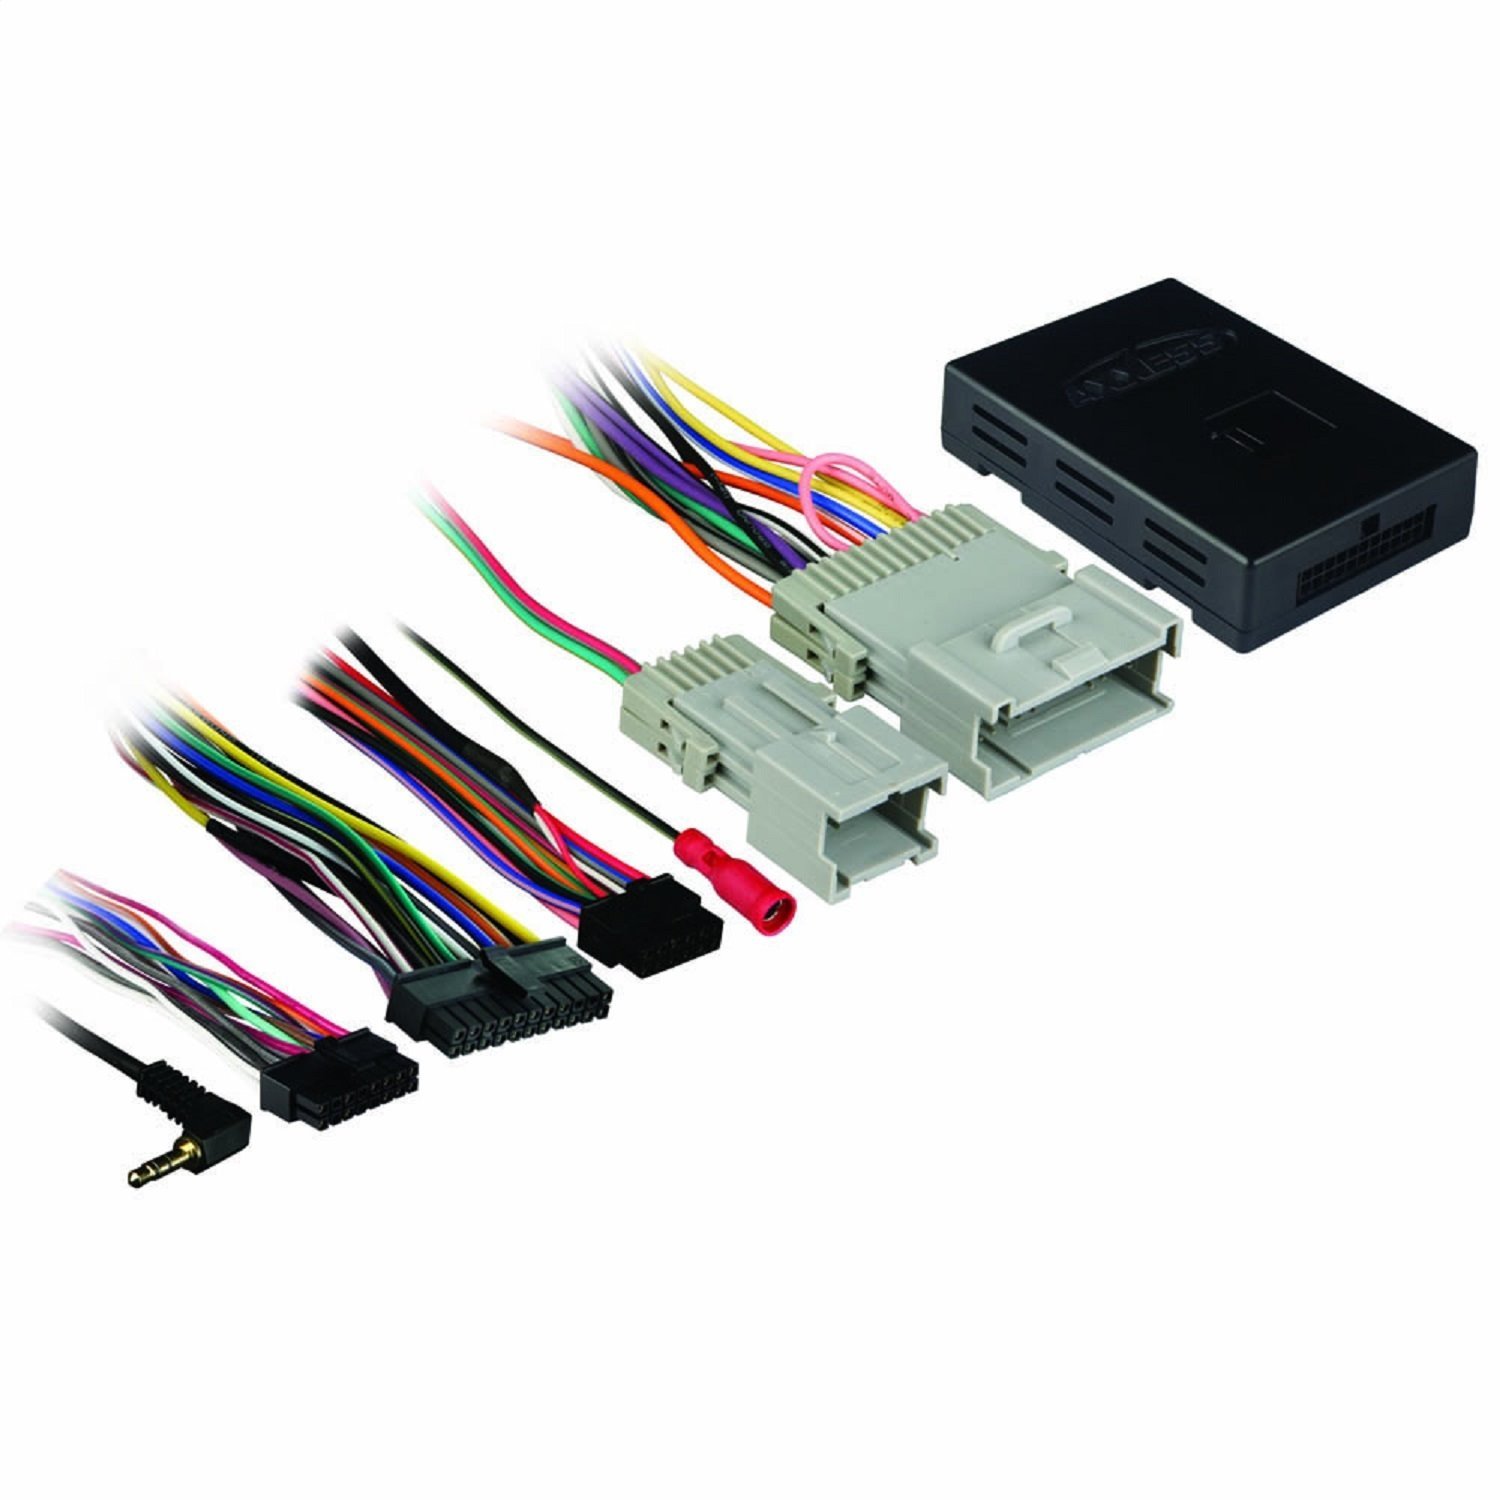 AXGM-01 Data Interface, 12V, AXSWC Harness, Retains R.A.P., For GM 2000-2013